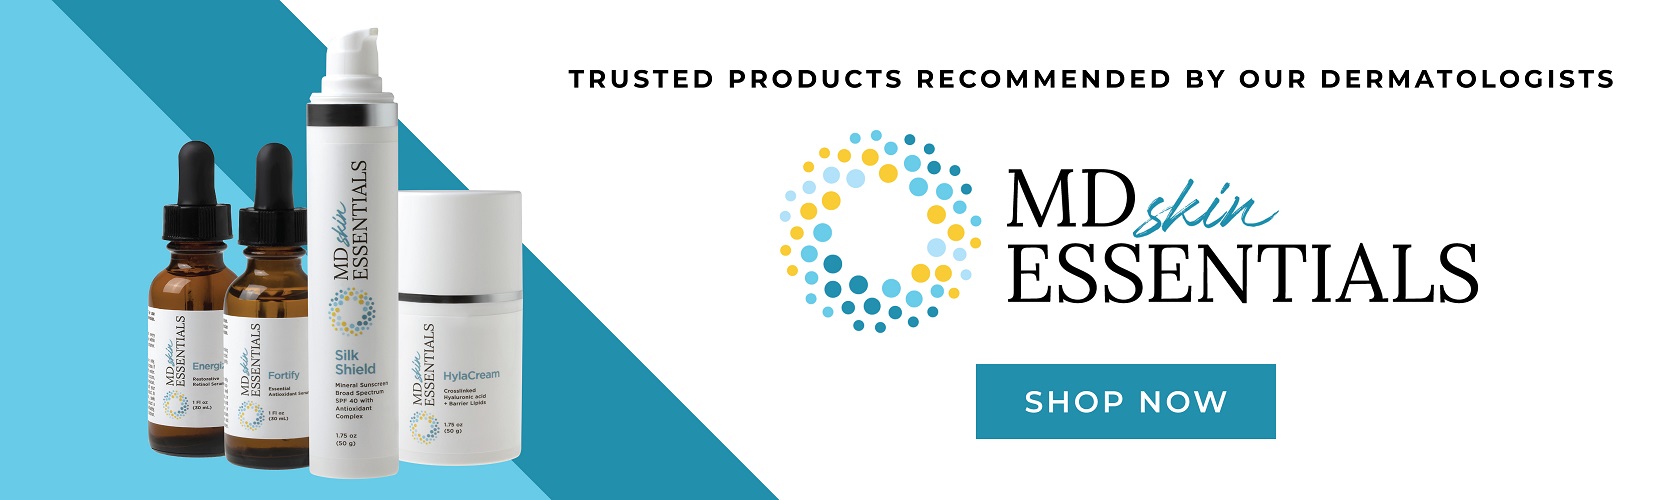 Trusted Products Recommended by Our Dermatologists